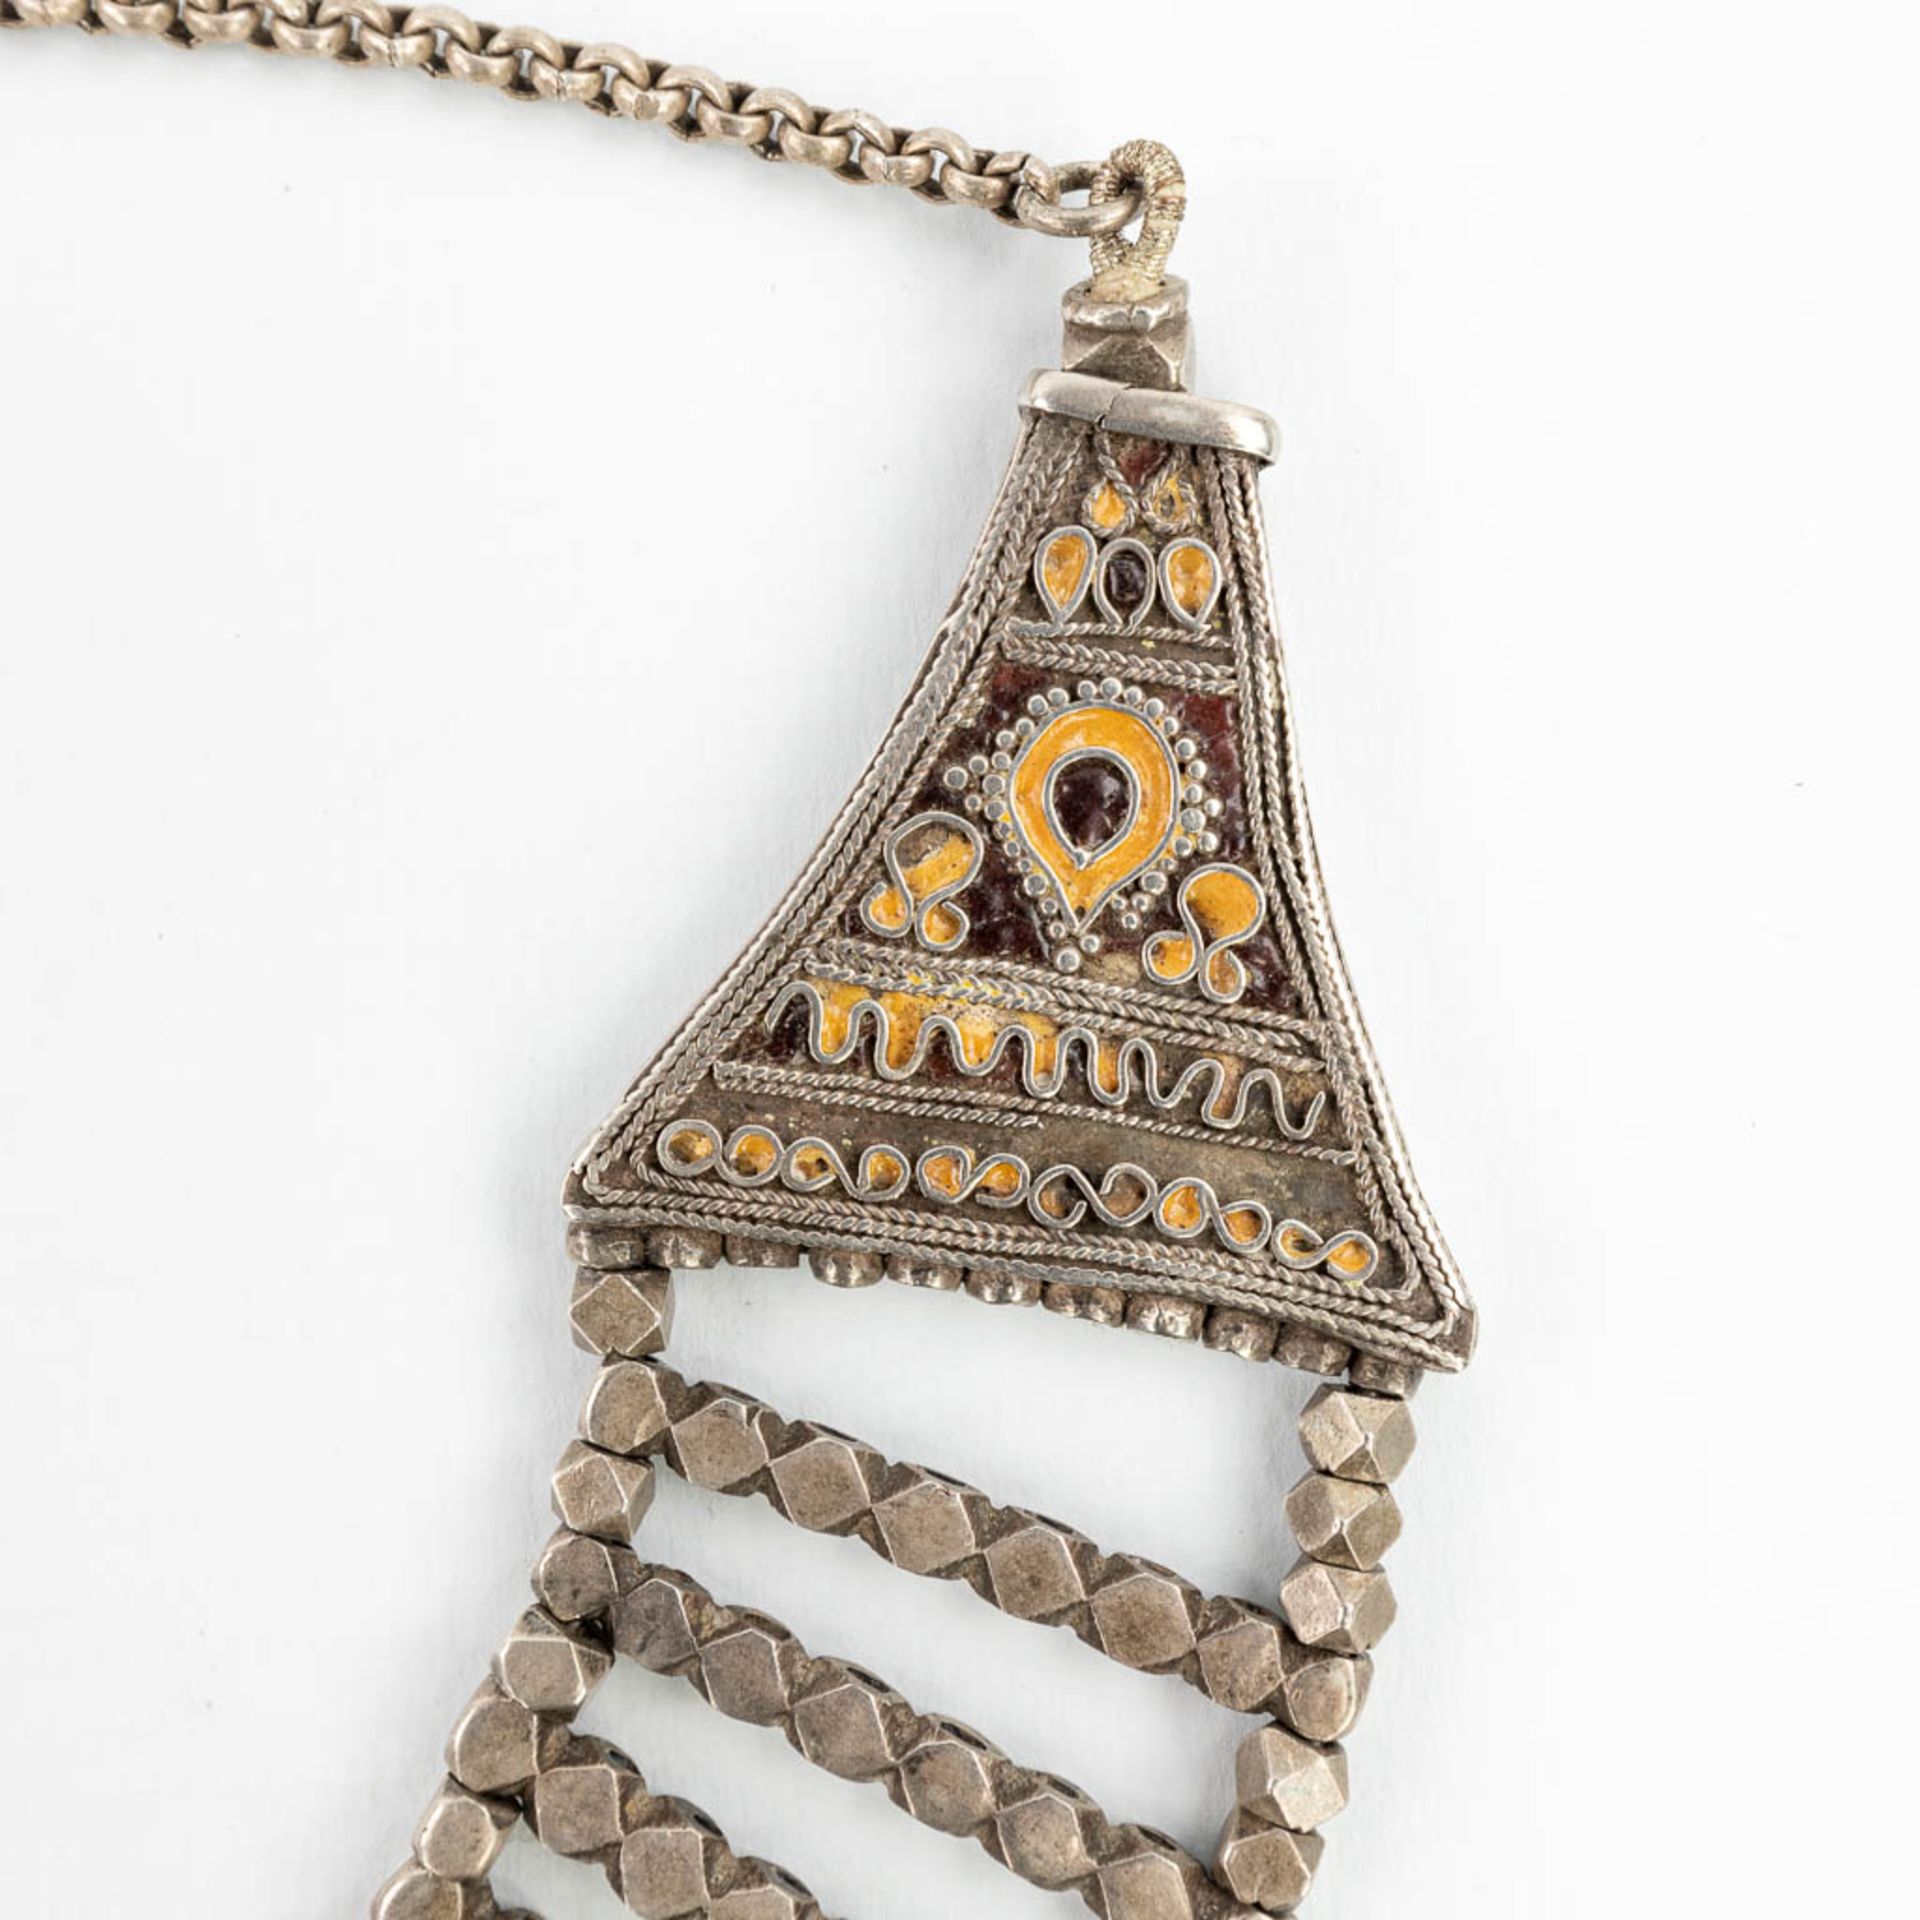 A necklace and belt made of silver in Oriental style. - Image 12 of 14